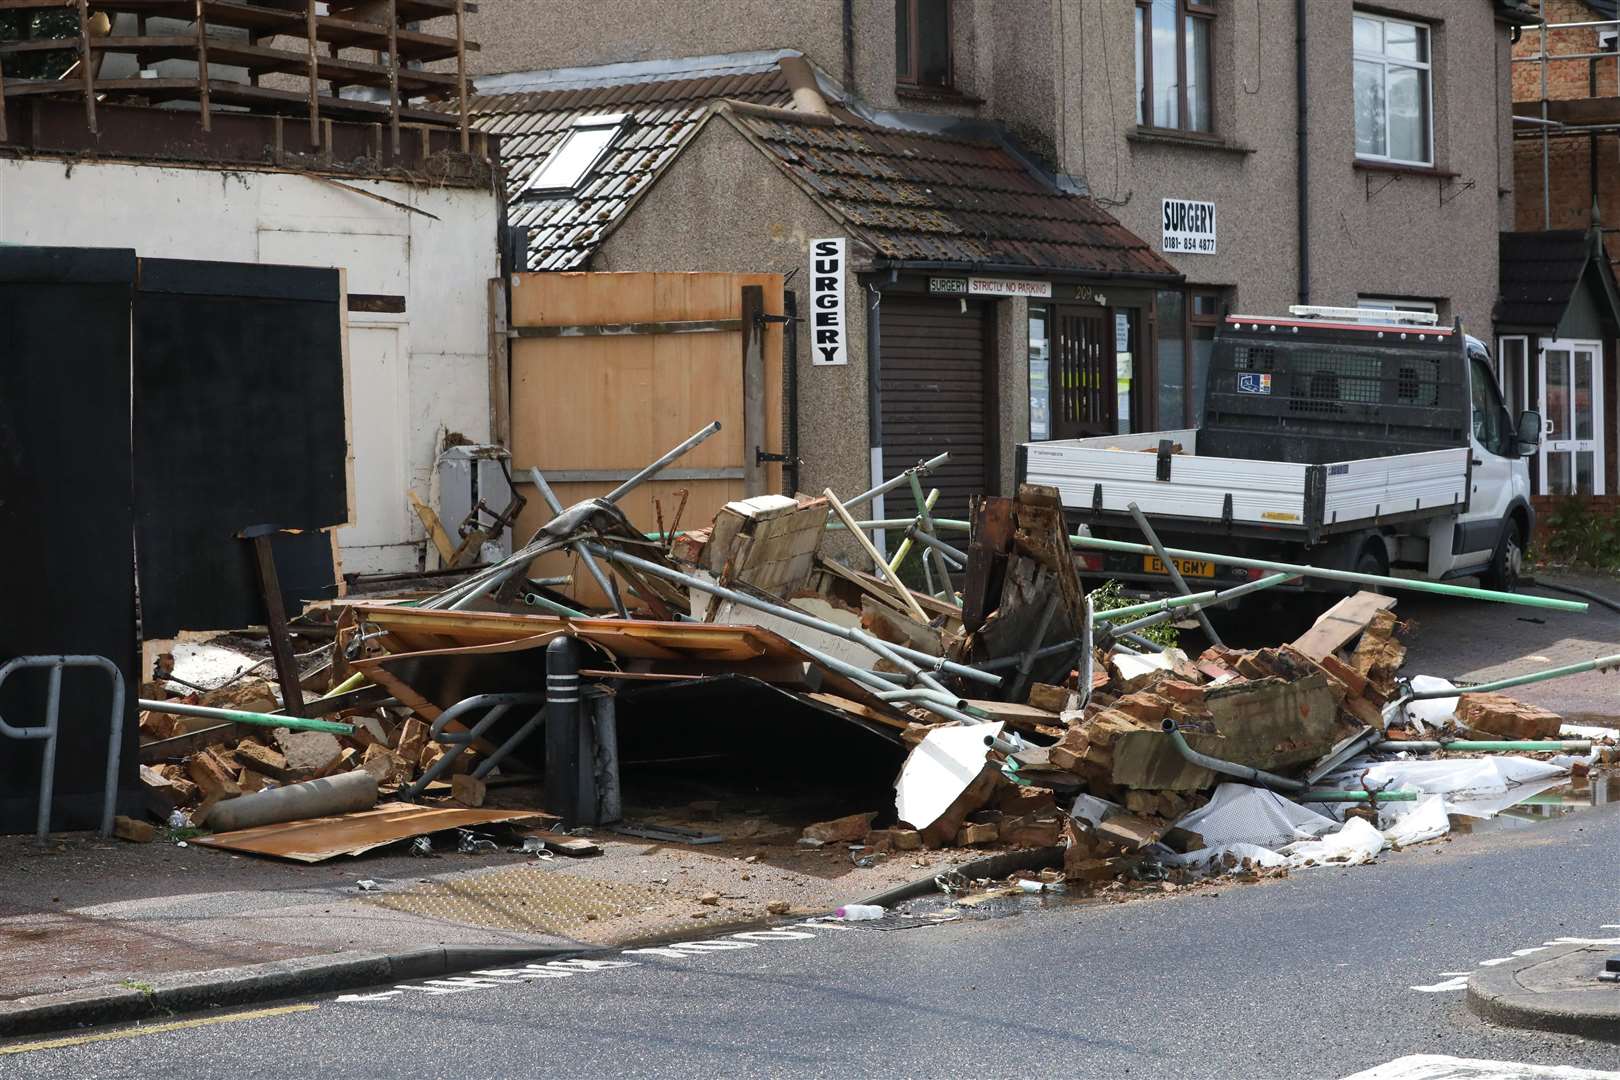 A man was taken to hospital after the building collapsed in Welling. Image from UKNIP